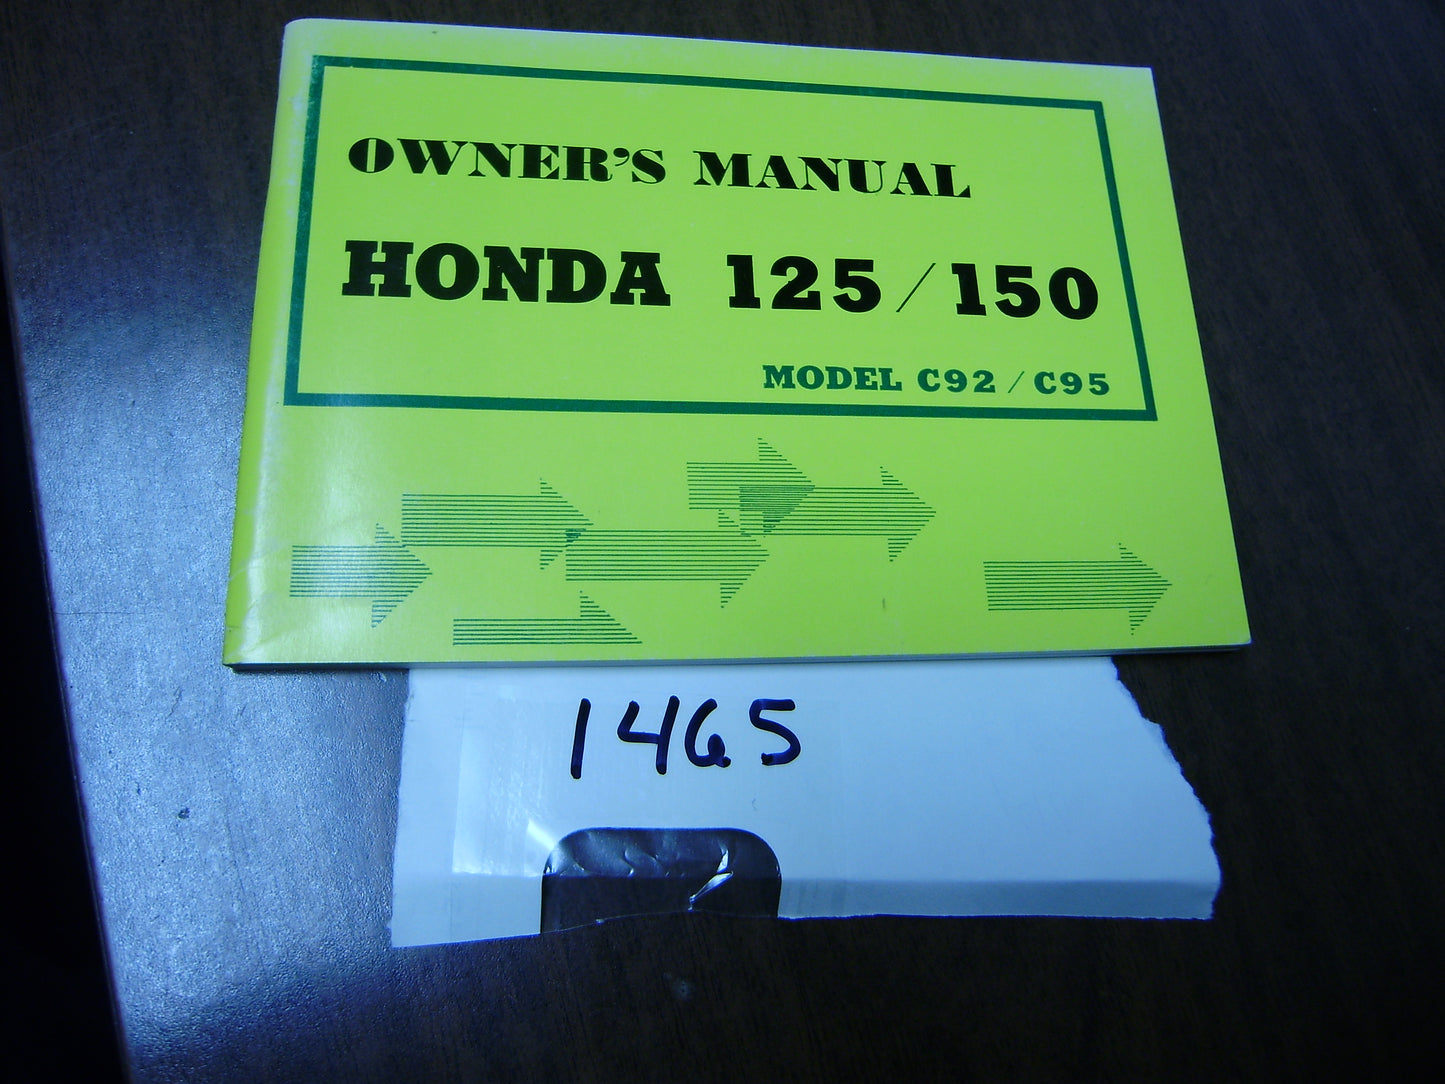 Honda  CA95  Owners Manual Benly 150 Benly 125 New Condition sku 1465